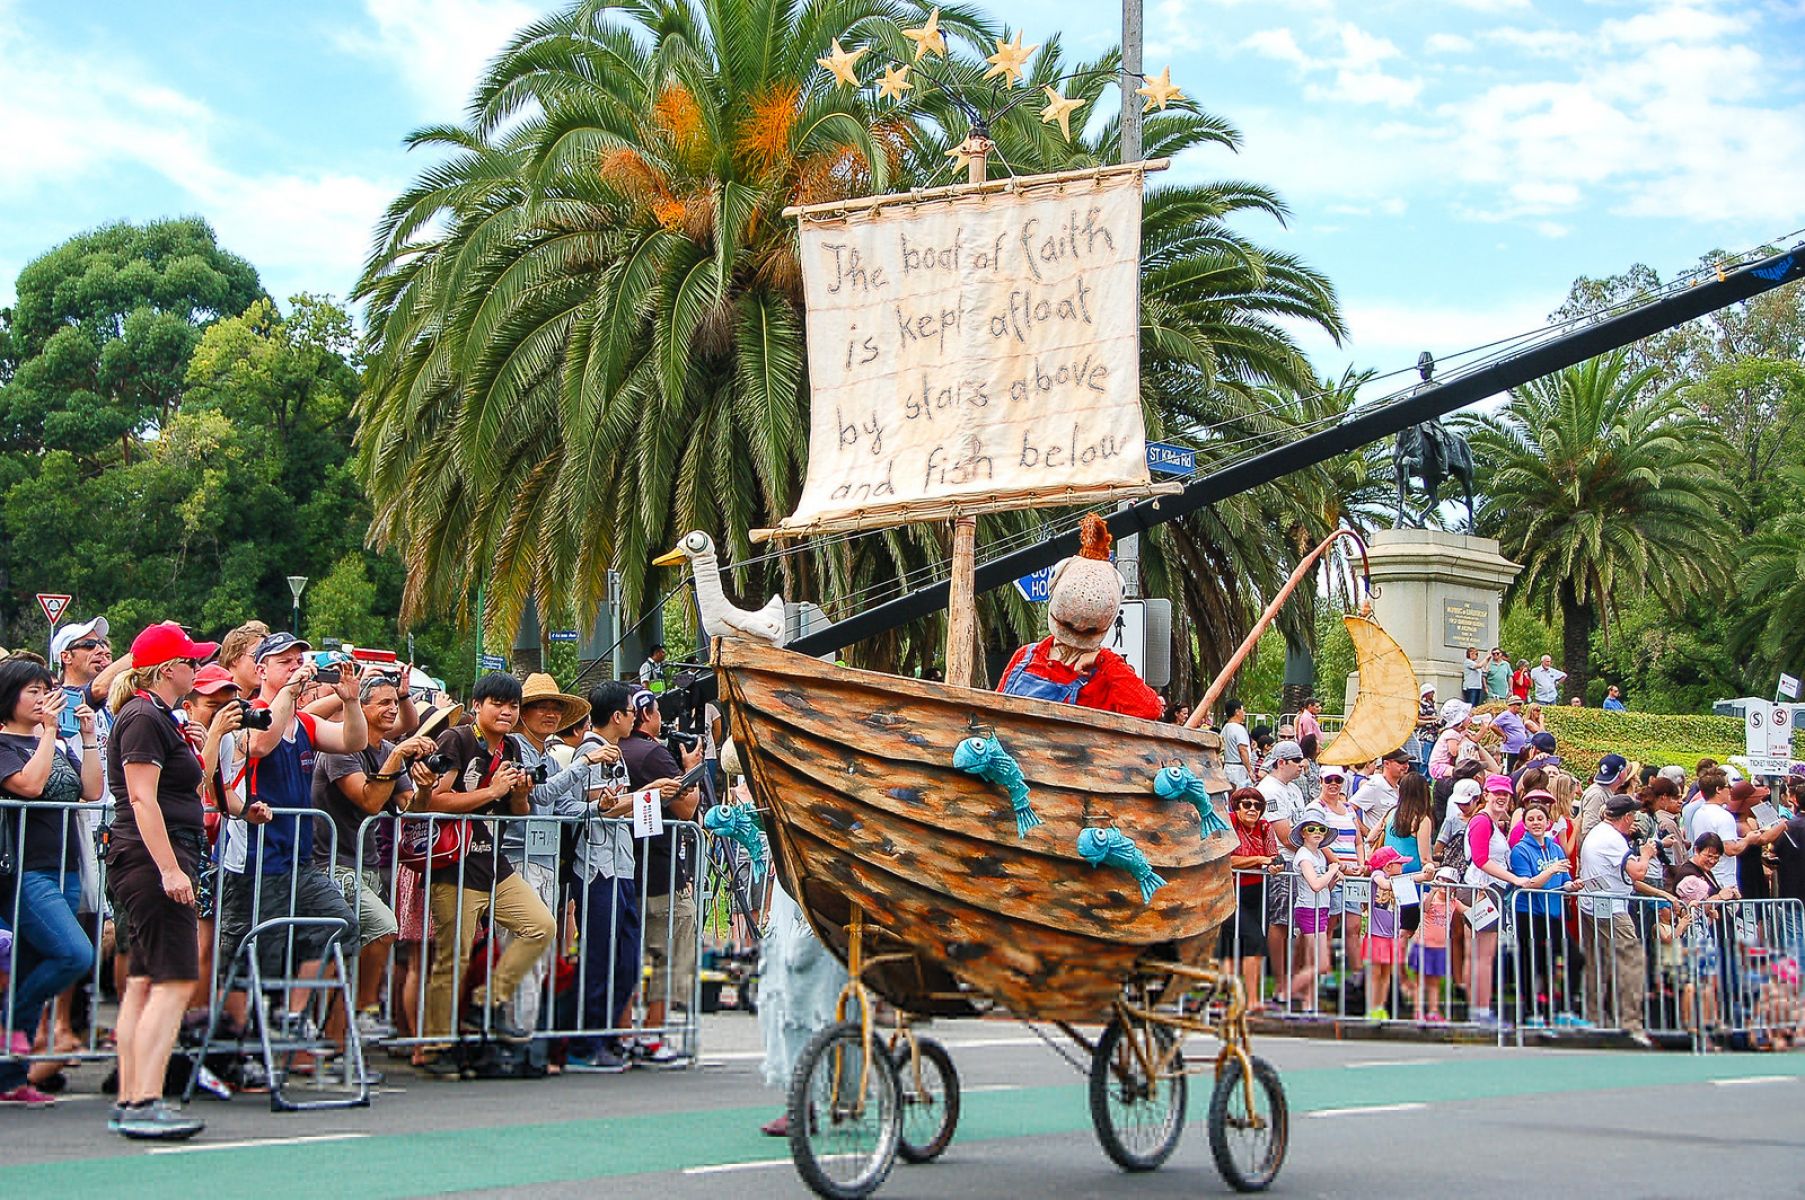 A parade float in the shape of a Leunig boat